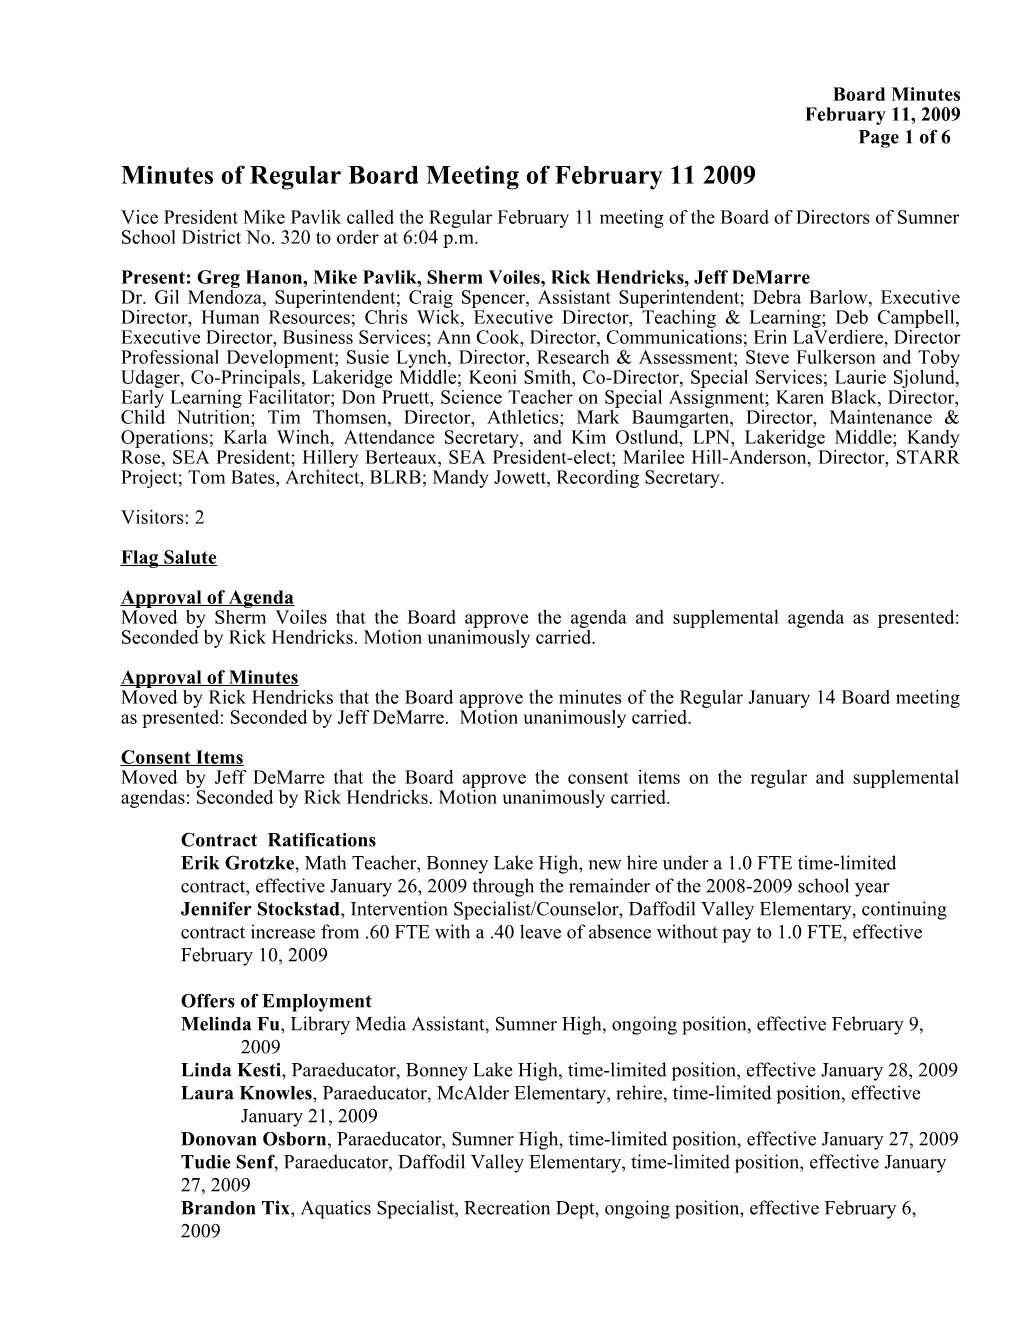 Minutes of Regular Board Meeting of February 11 2009